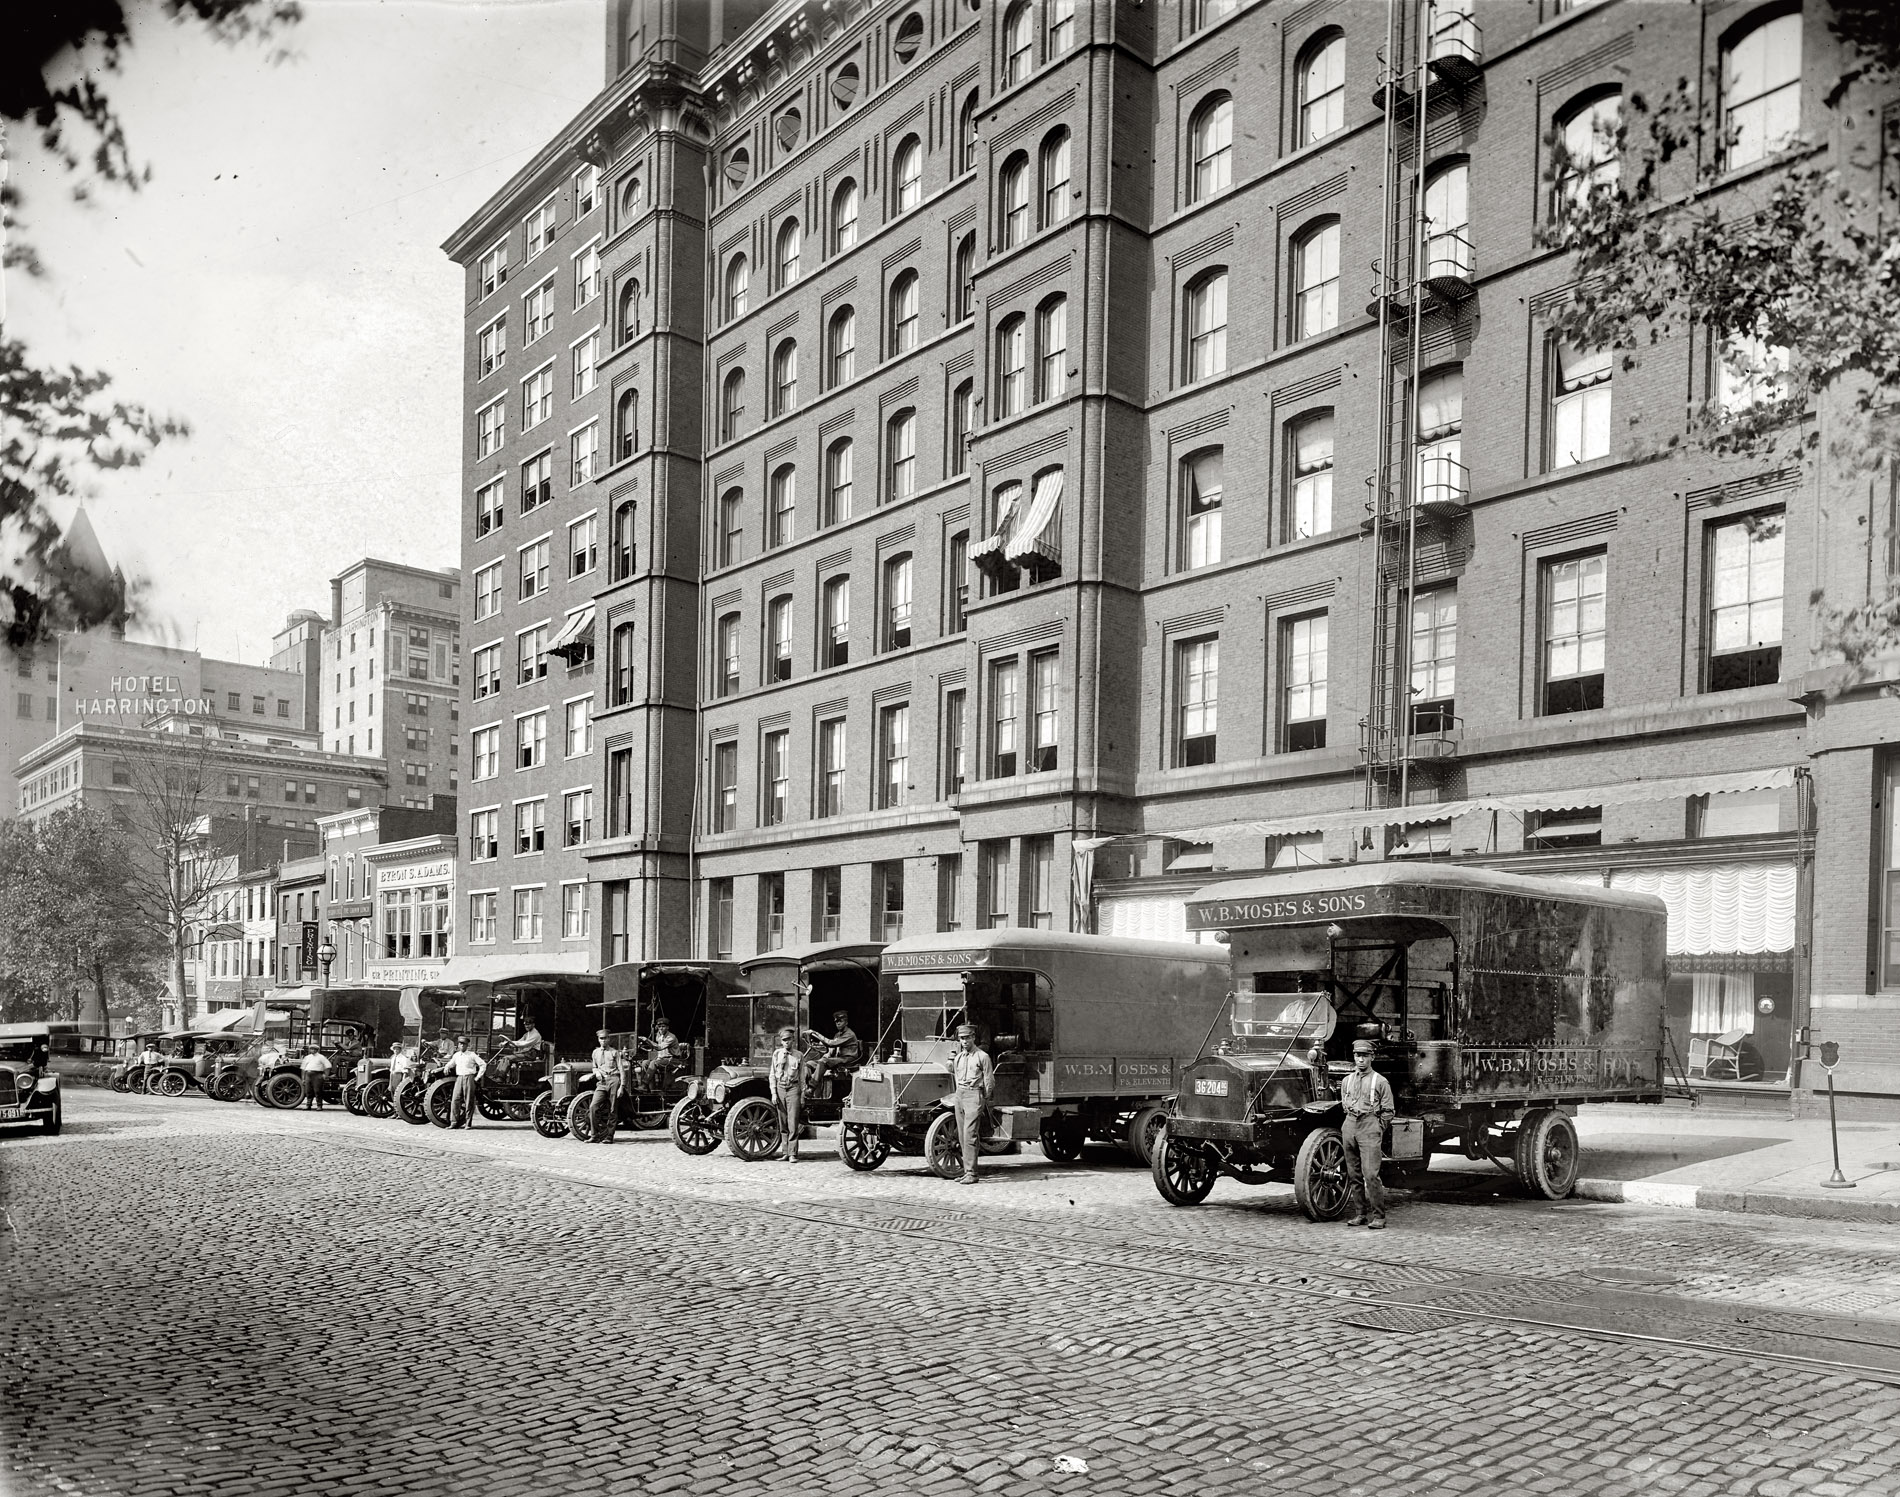 Washington, D.C., 1923. "W.B. Moses & Sons, F and 11th Sts." Note the unusual circular windows at the top of the building. National Photo Co. View full size.